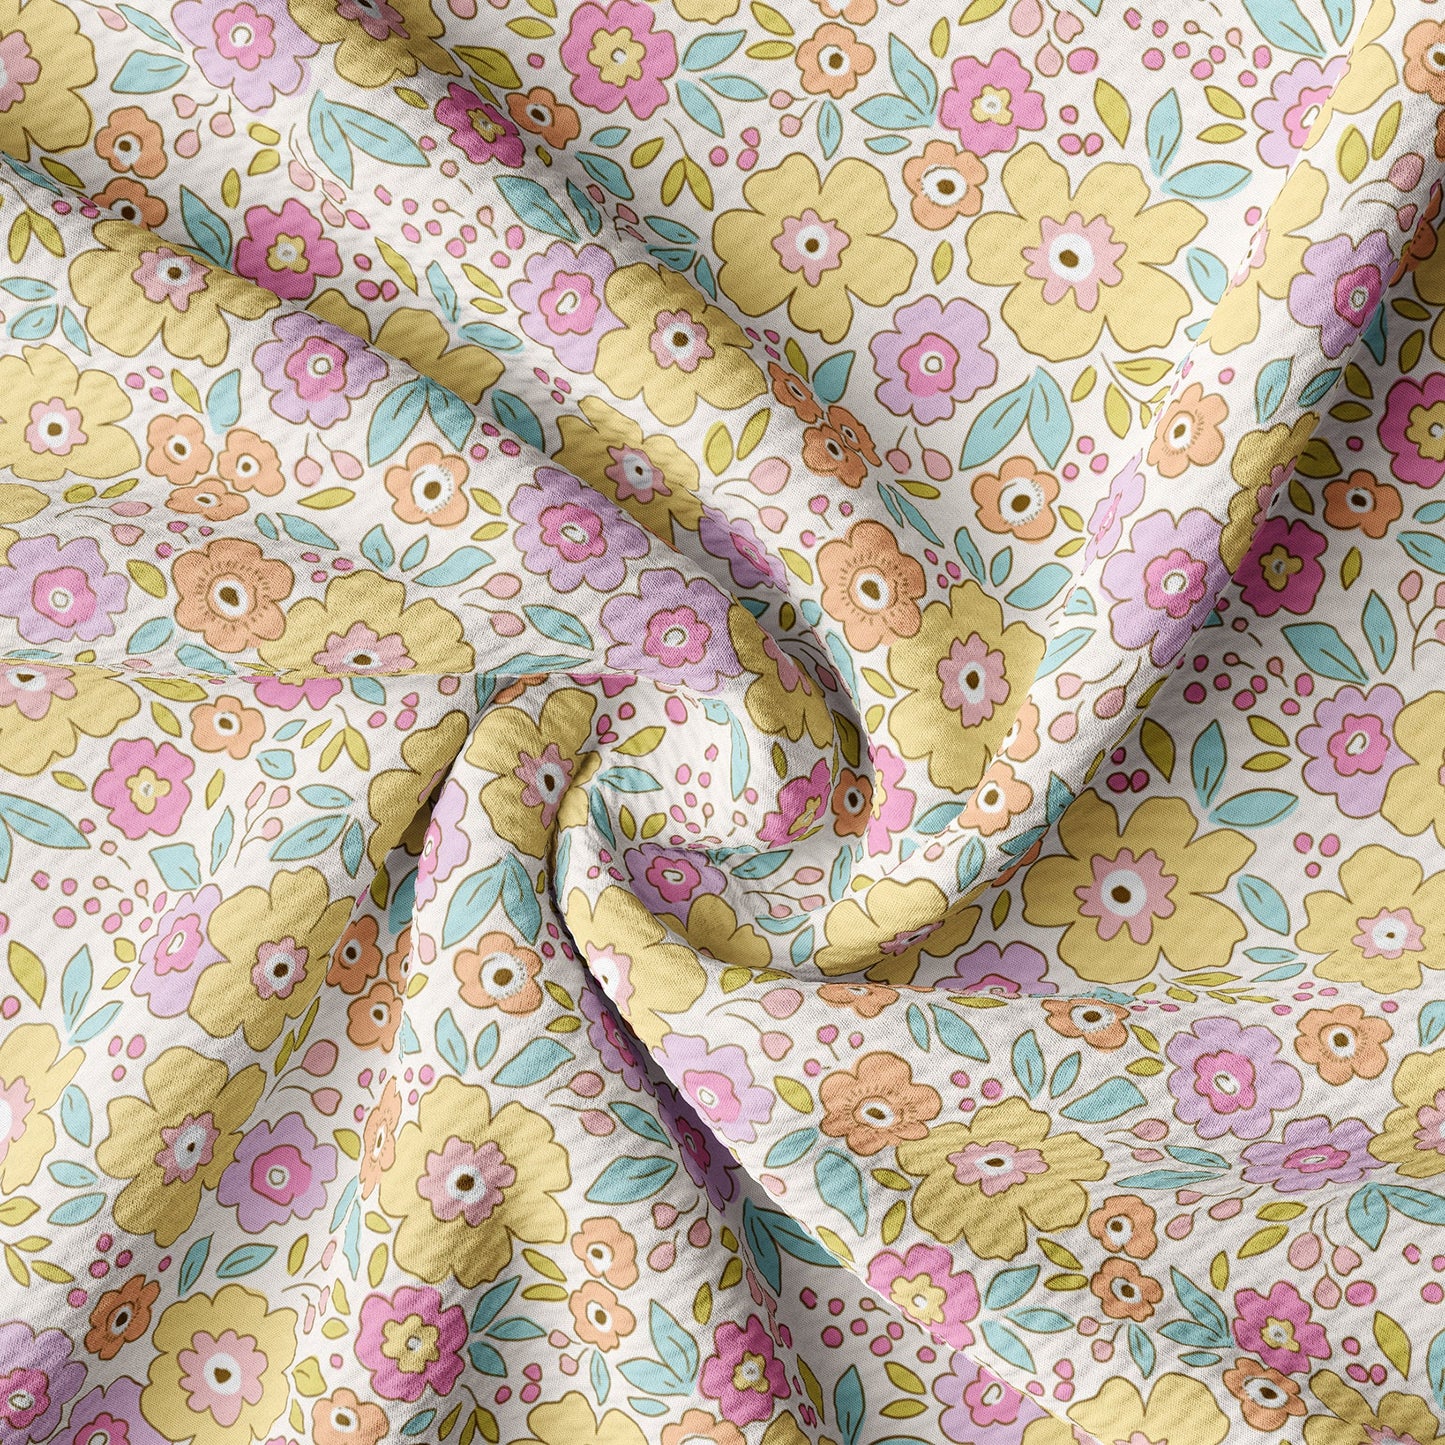 Floral  Bullet Textured Fabric by the yard AA1645